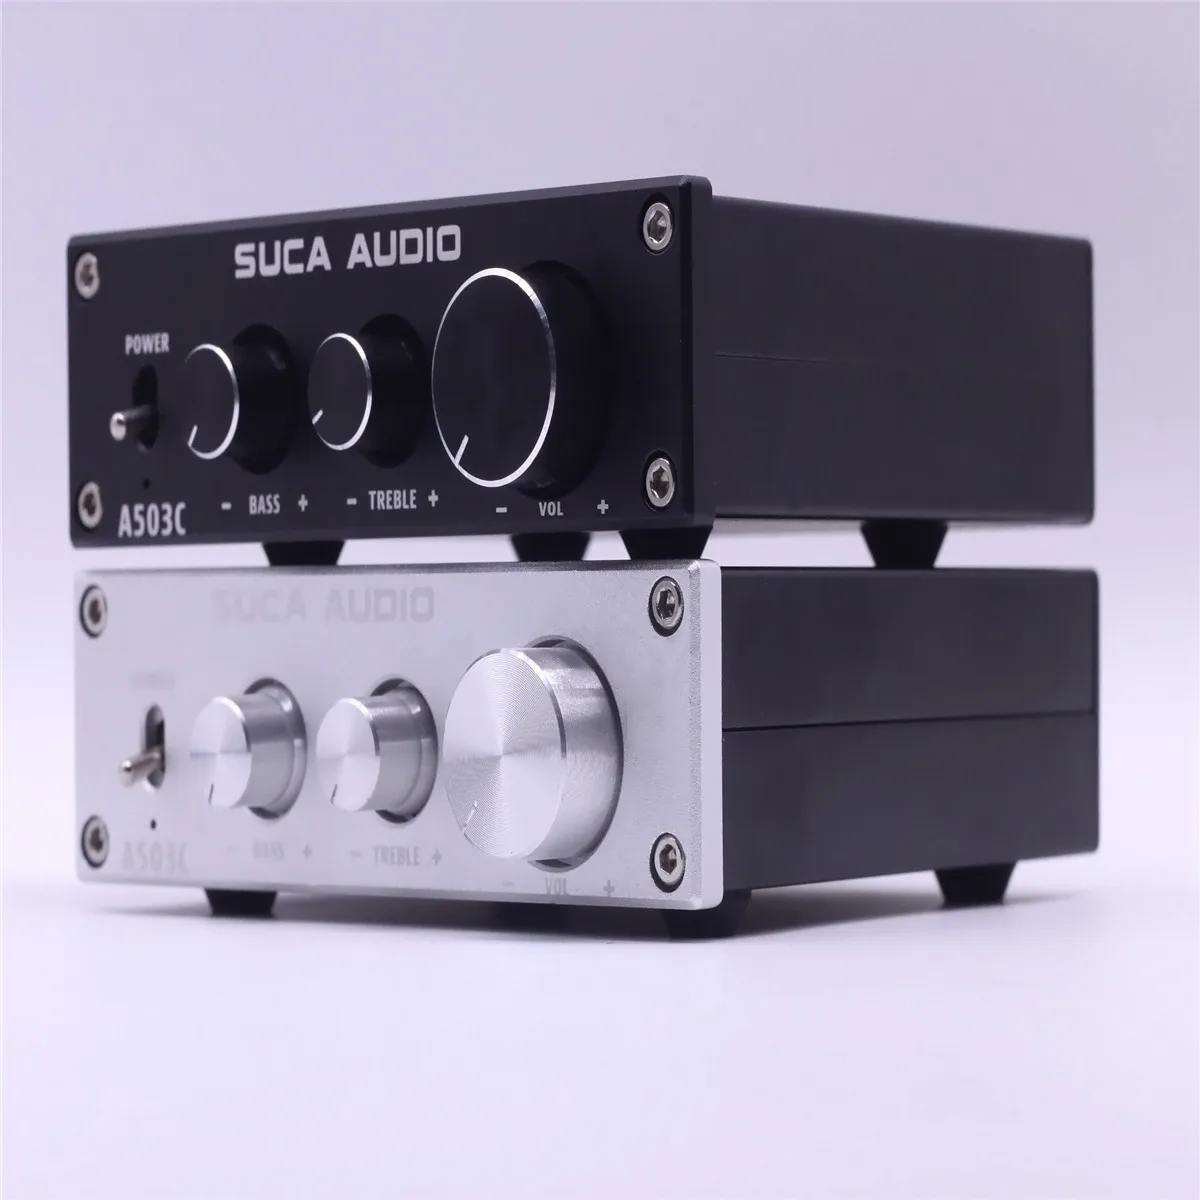 

SUCA TPA3116D2 Subwoofer Amplifier 2.1 Channel High Power Home Audio Amplifiers Amplificador 2*50W+100W With bluetooth 5.0